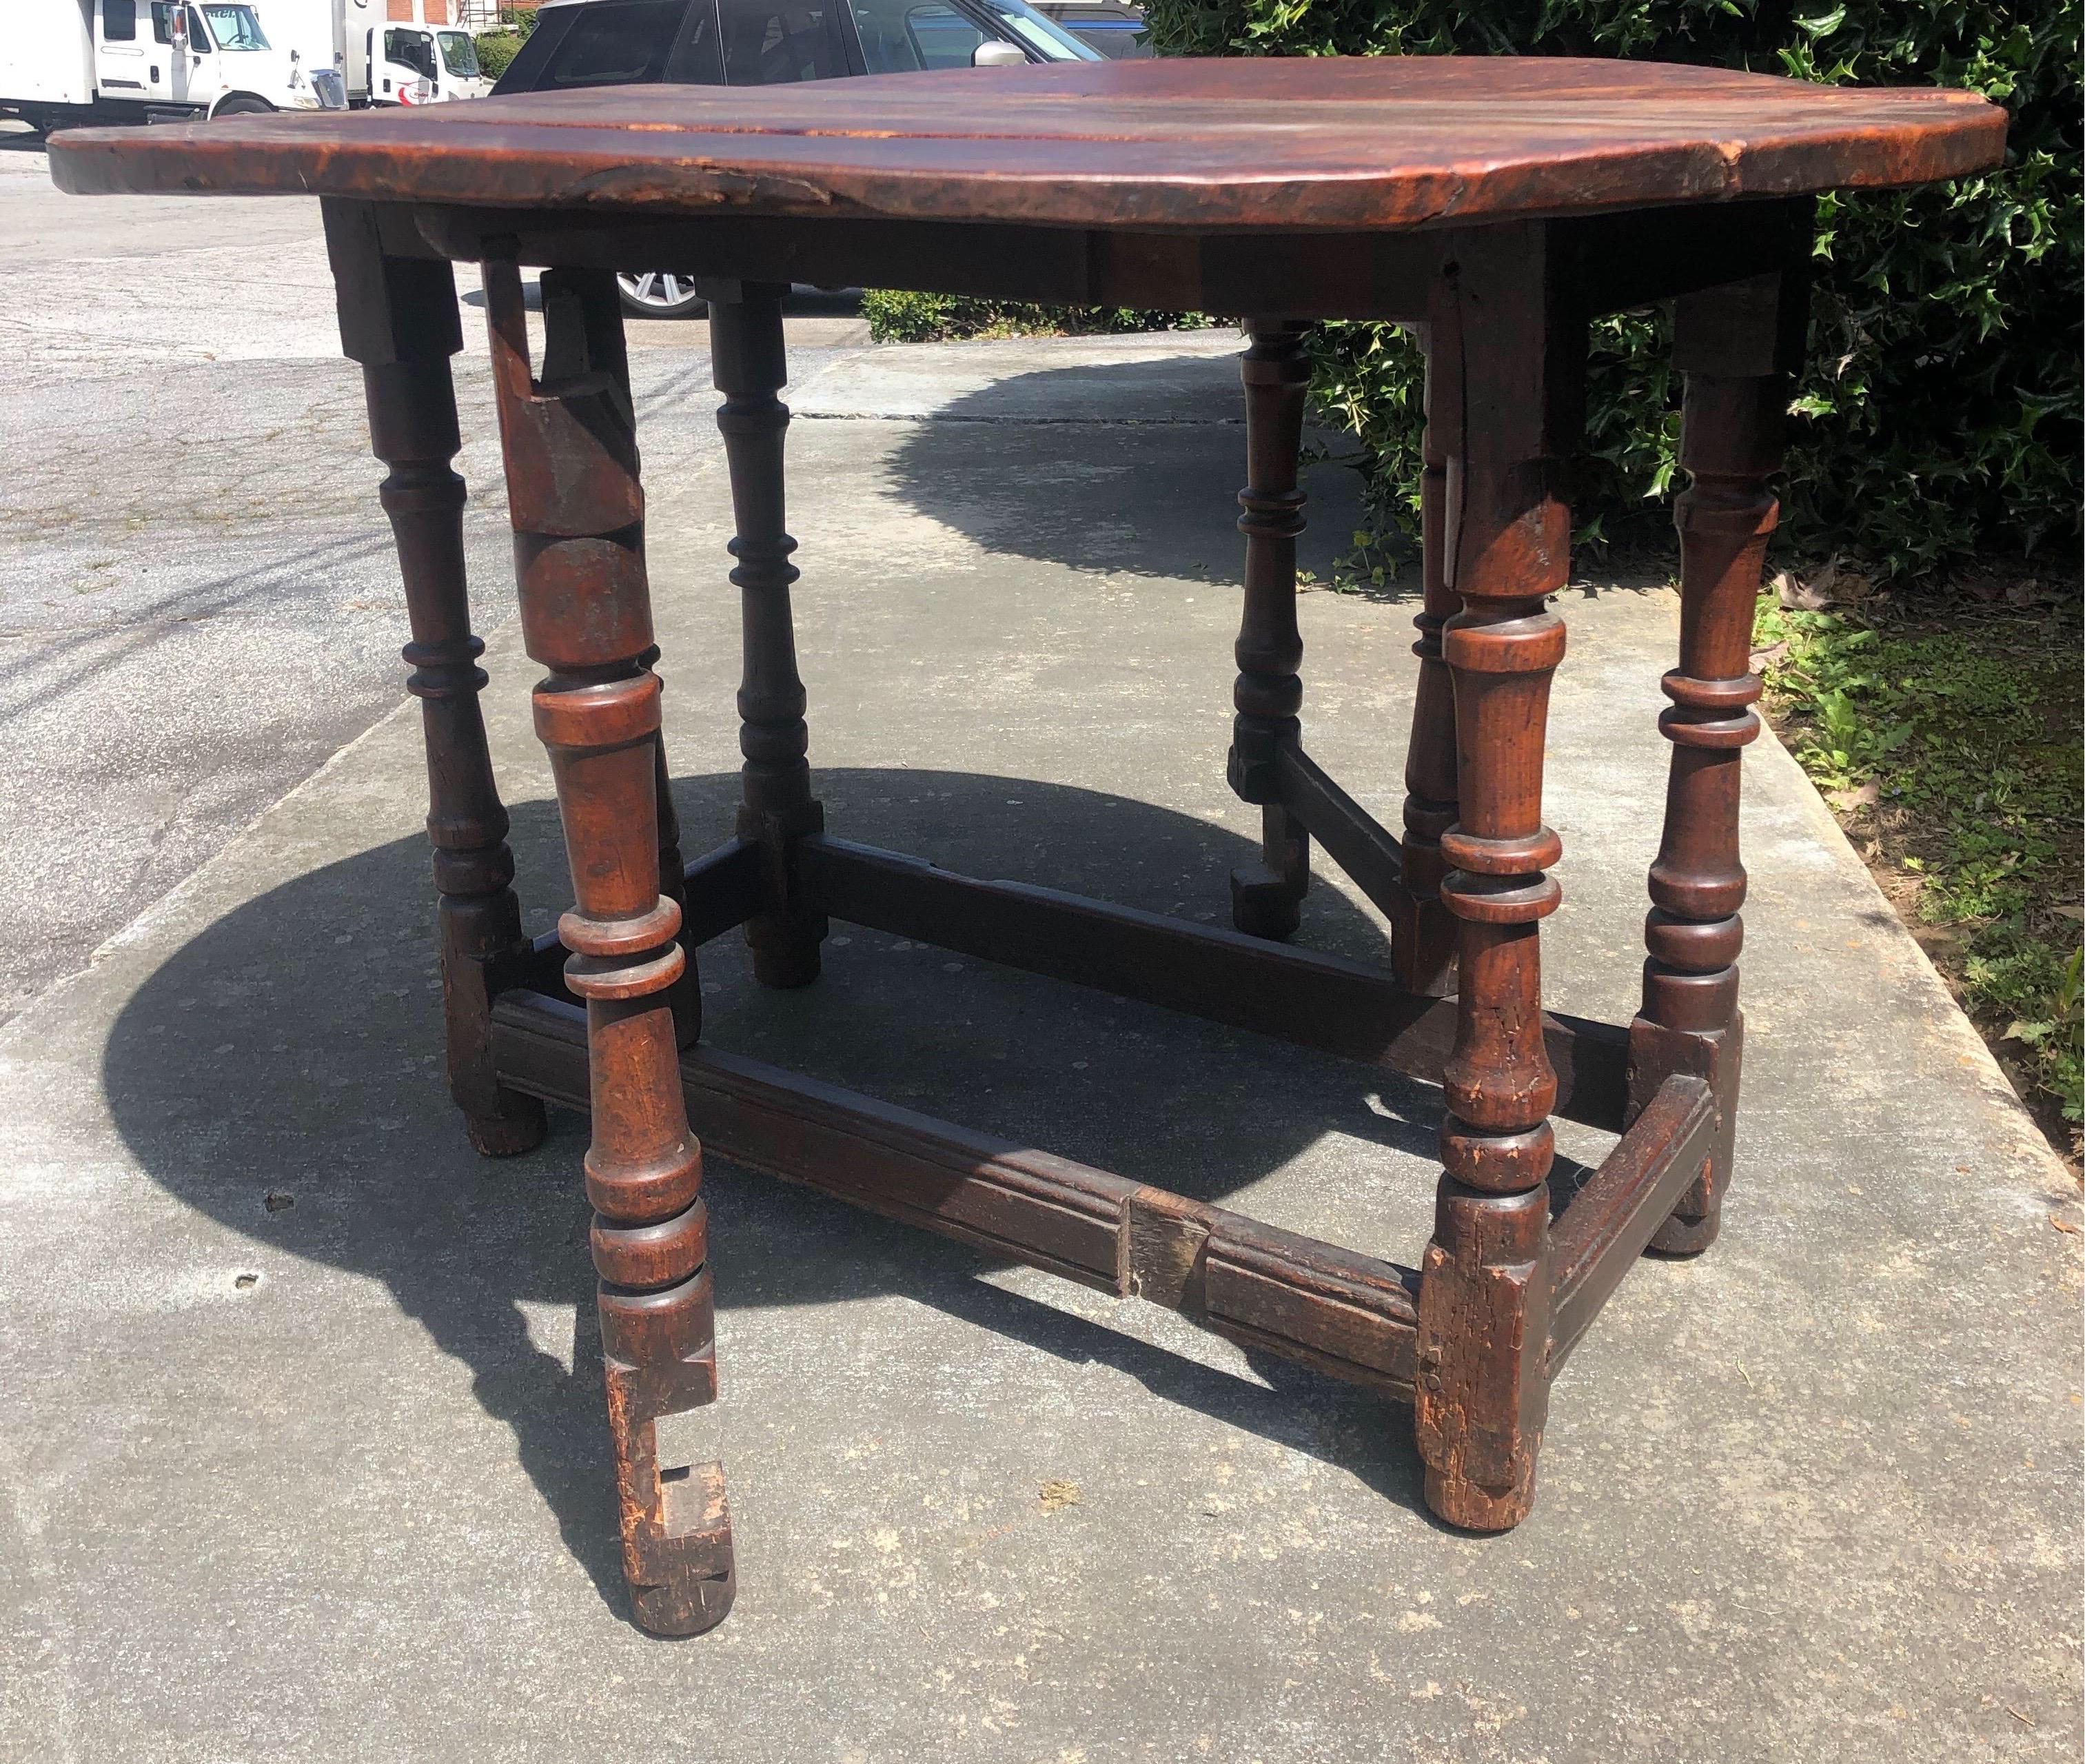 Early 18th century solid elm table with heavy three-plank top and ring turned legs. 300 years of use makes an incredibly beautiful patina throughout. 



Measures: 25